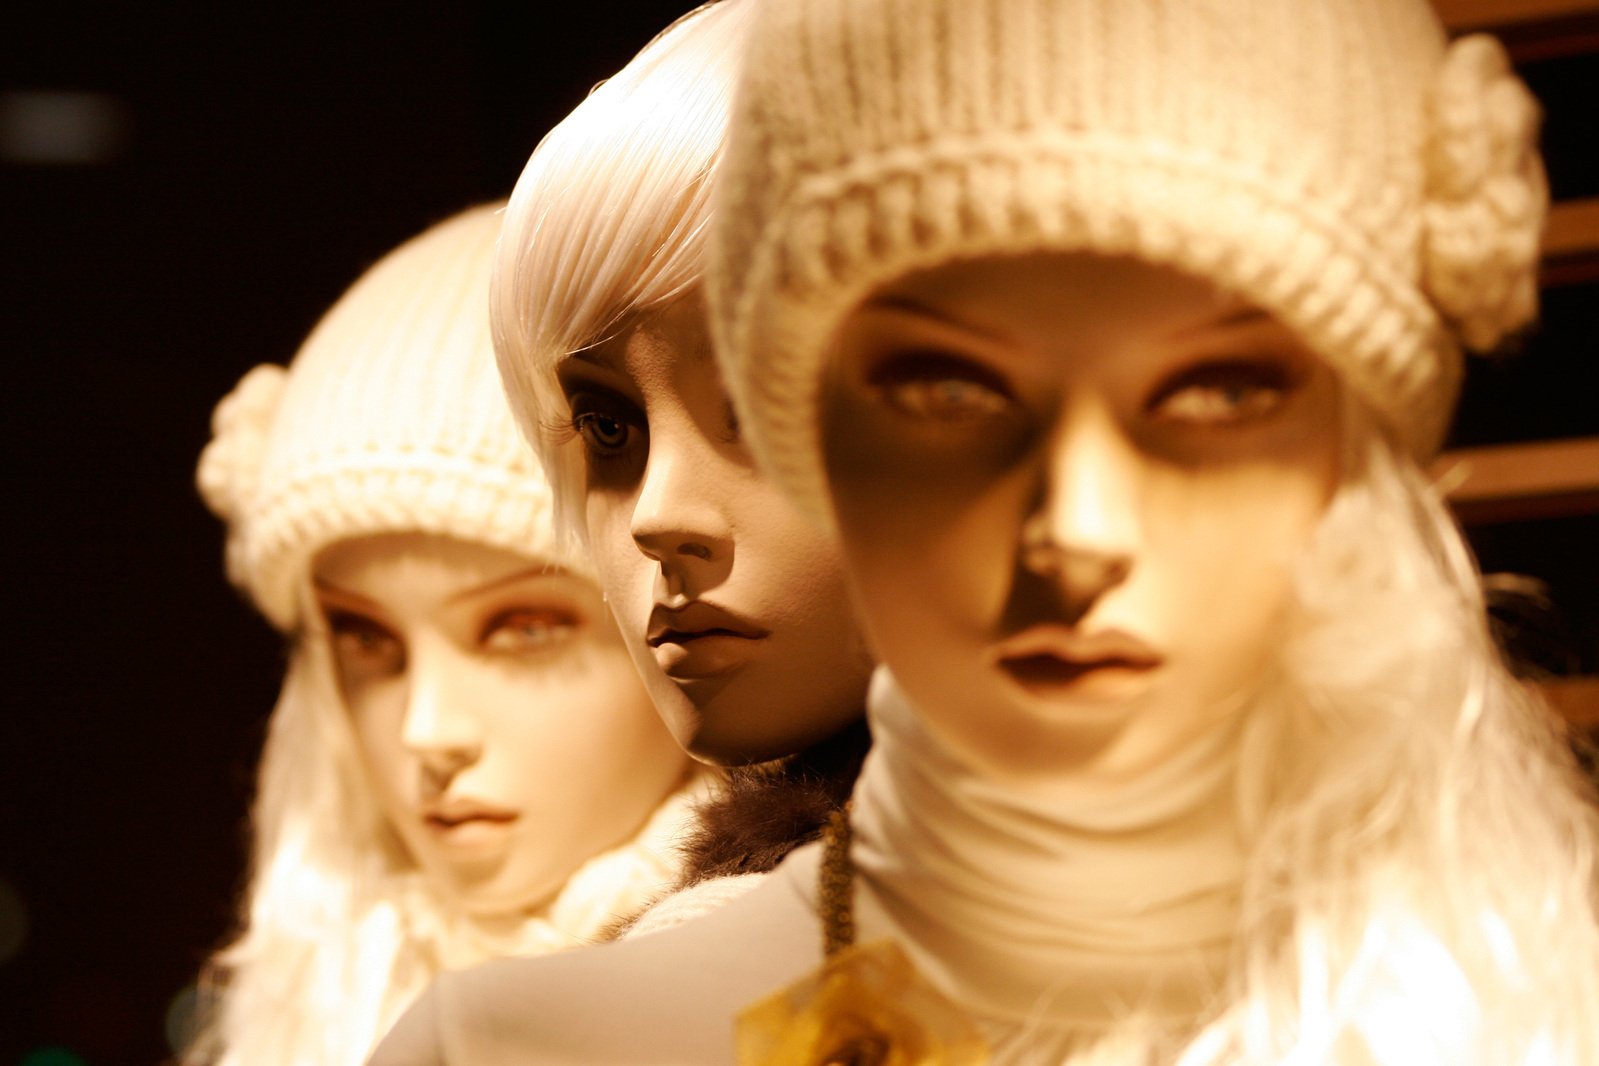 three mannequins dressed up in white knit clothing